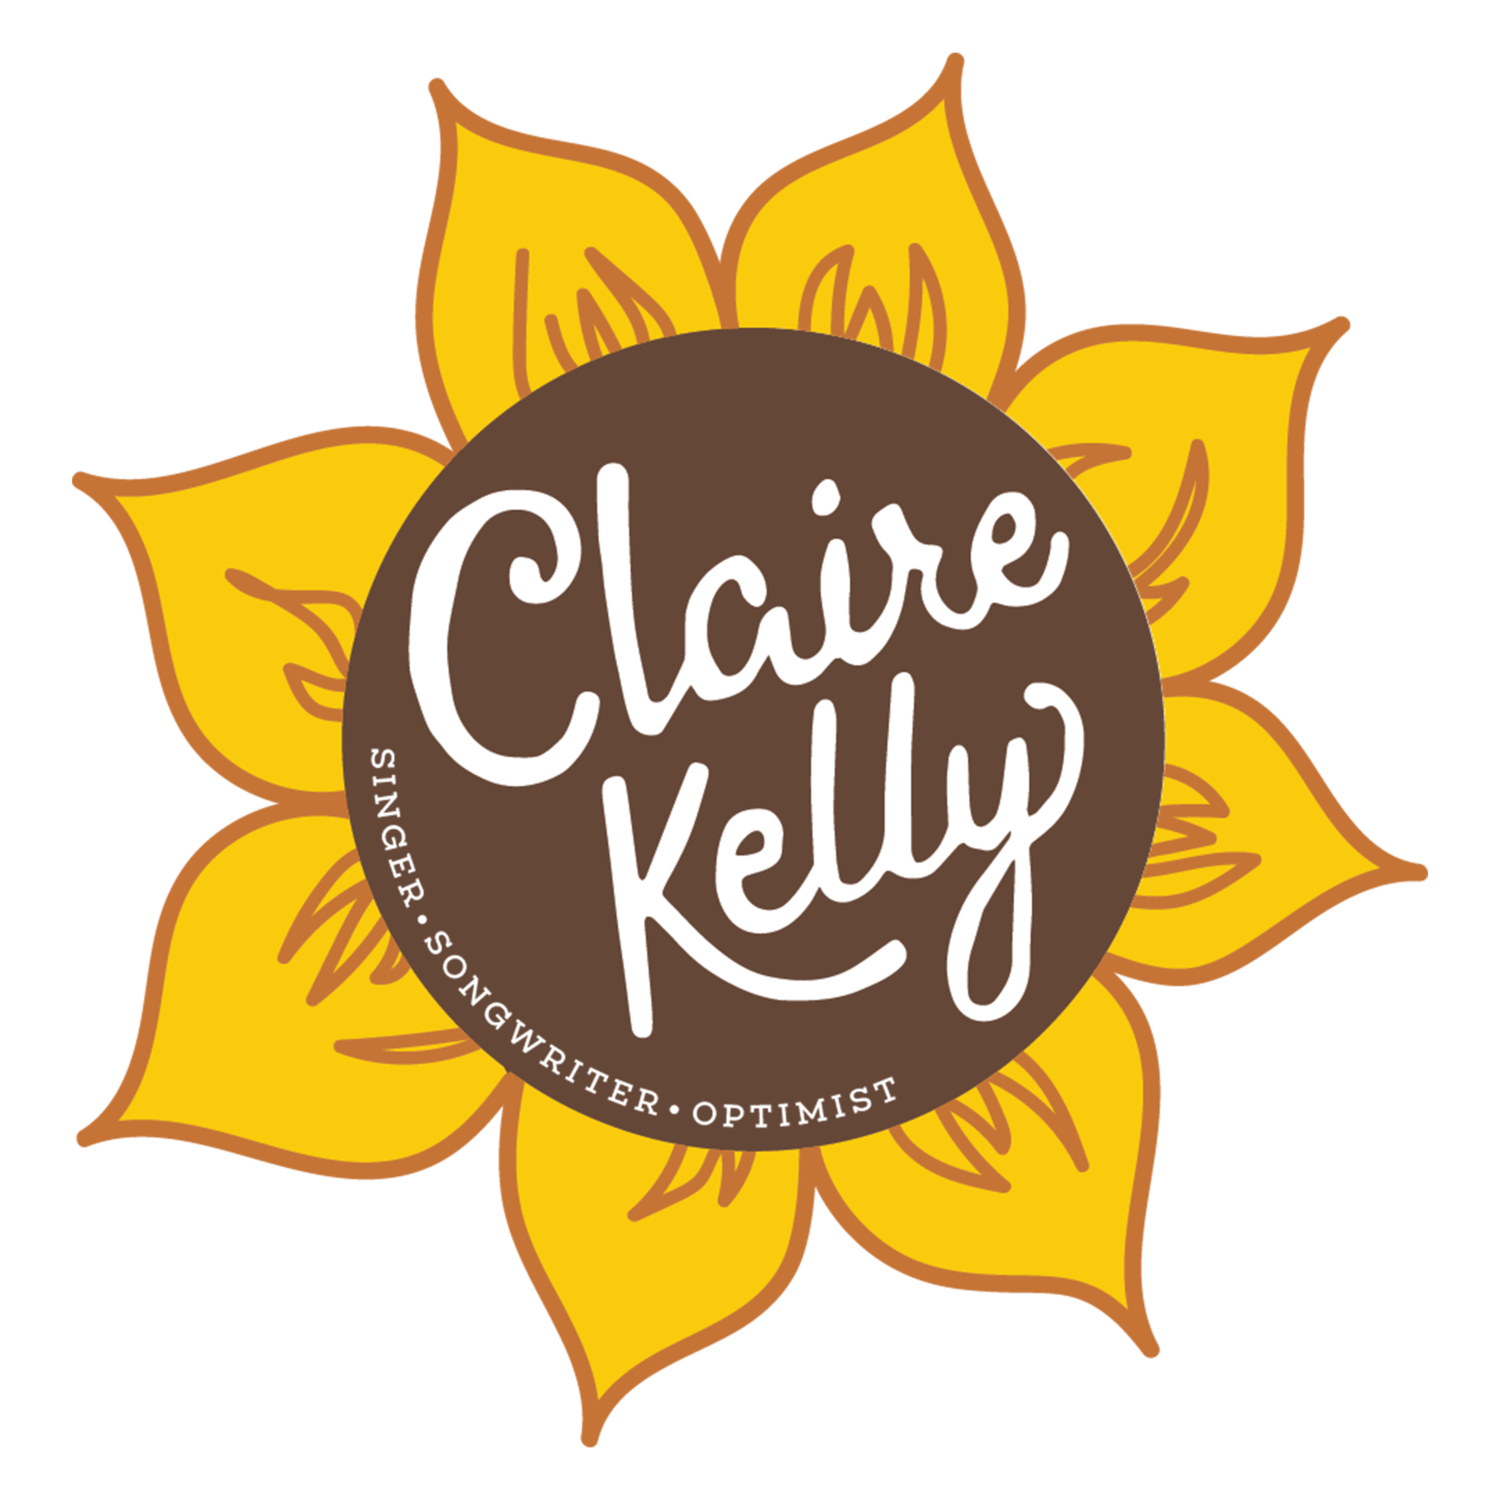 Claire Kelly